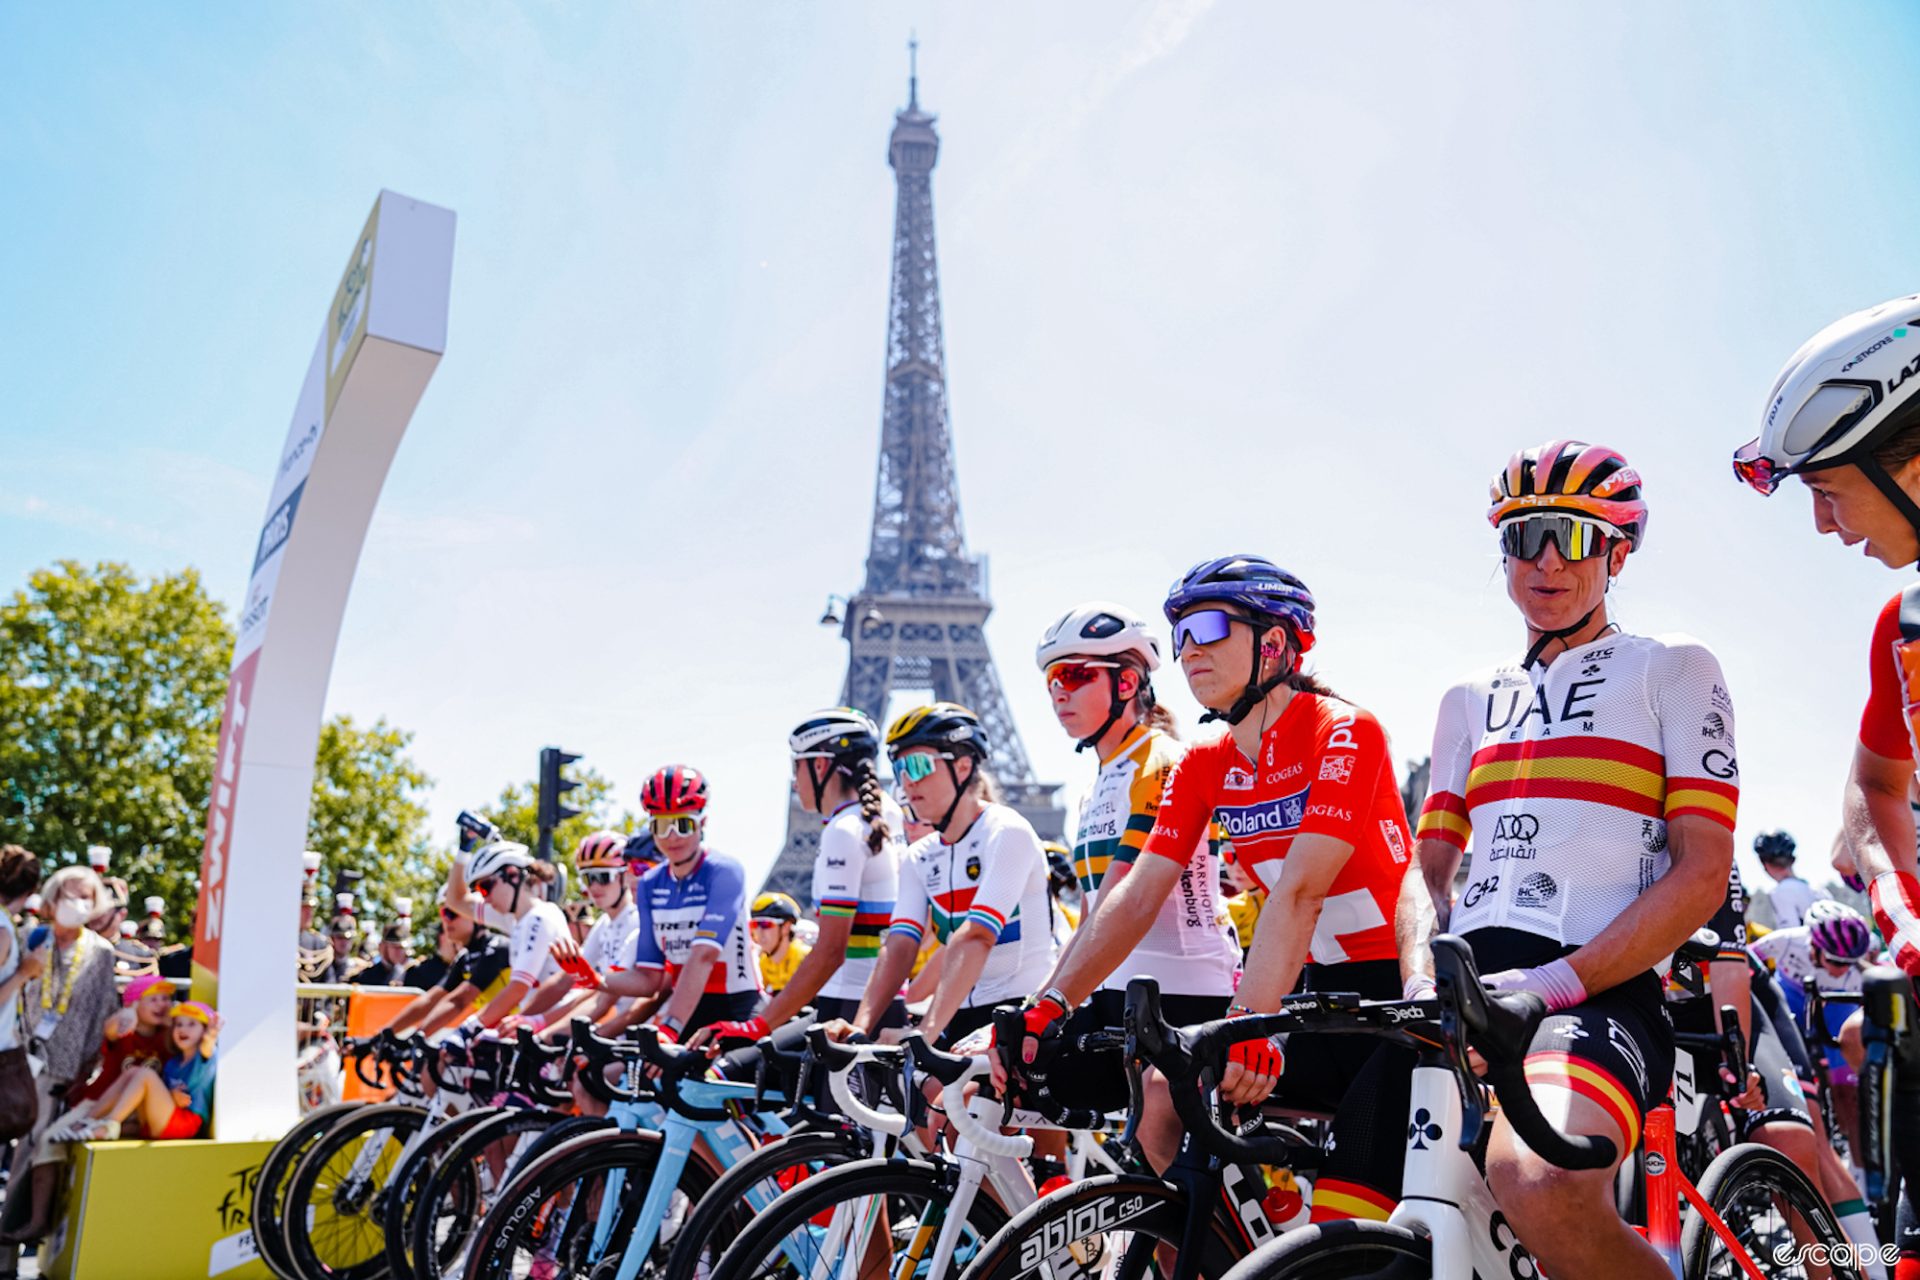 National champions lineup in front of the Eiffel Tower for the first stage of the 2022 Tour de France Femmes avec Zwift